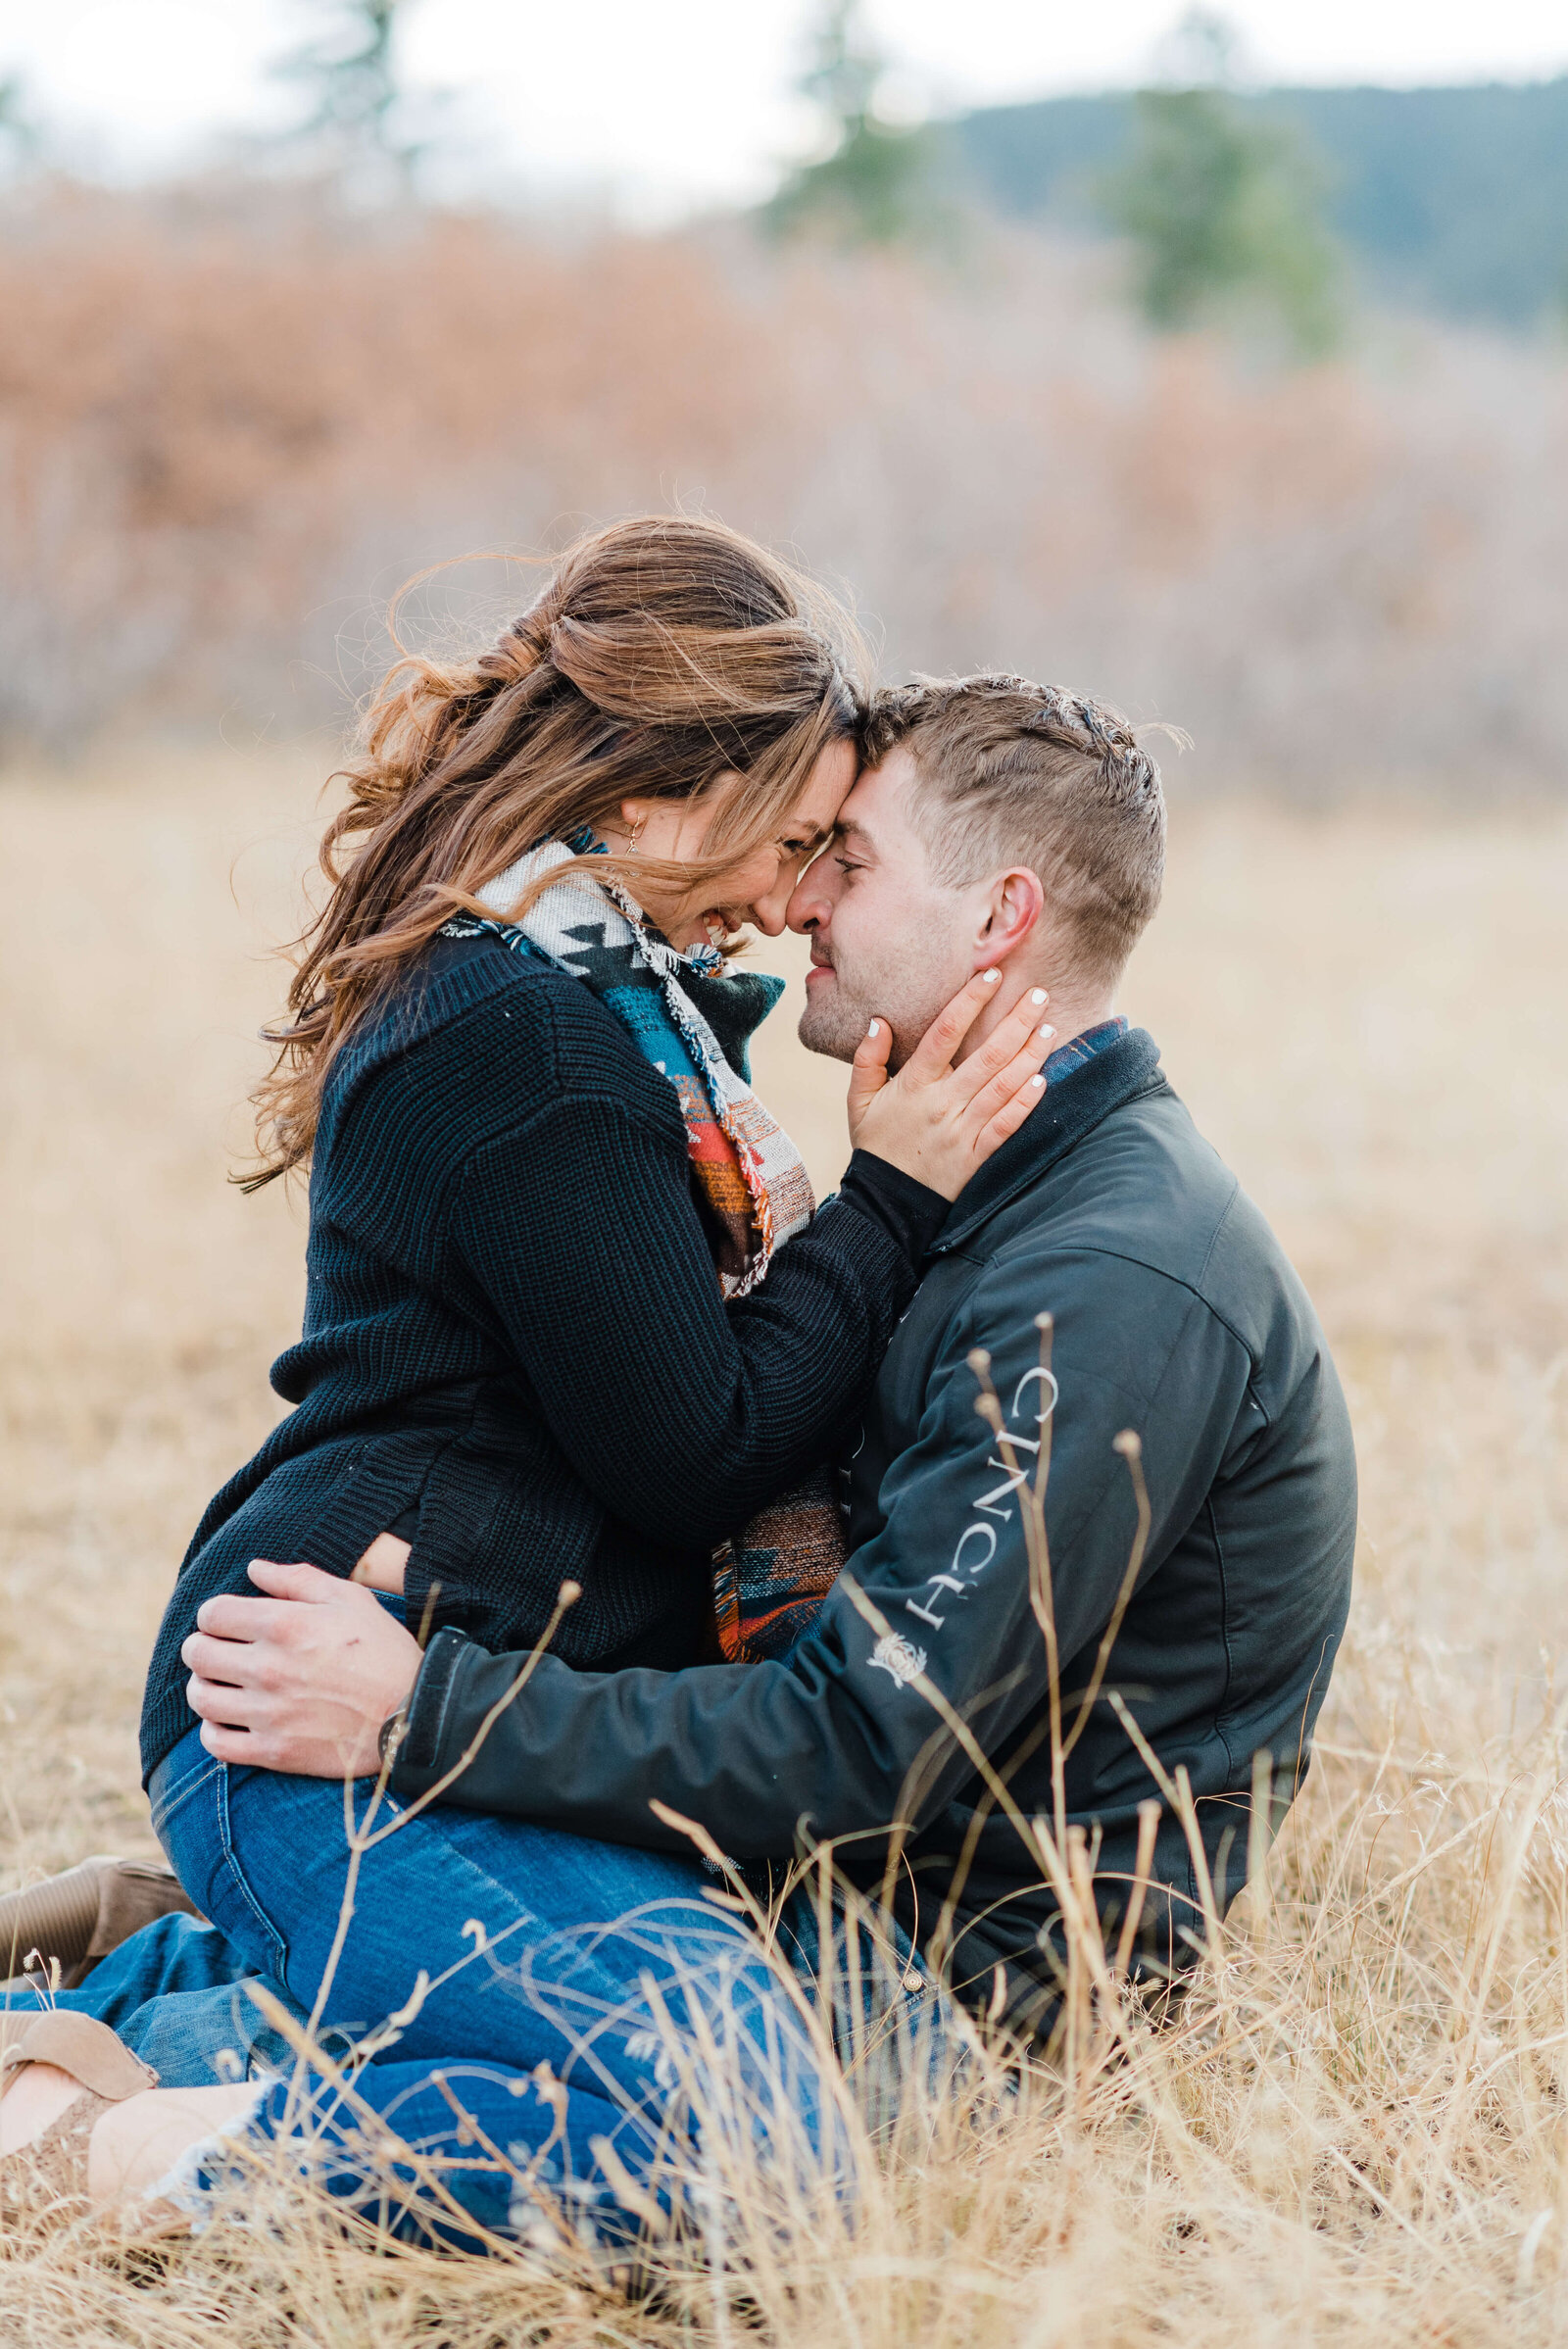 Man snuggling his fiance in a field